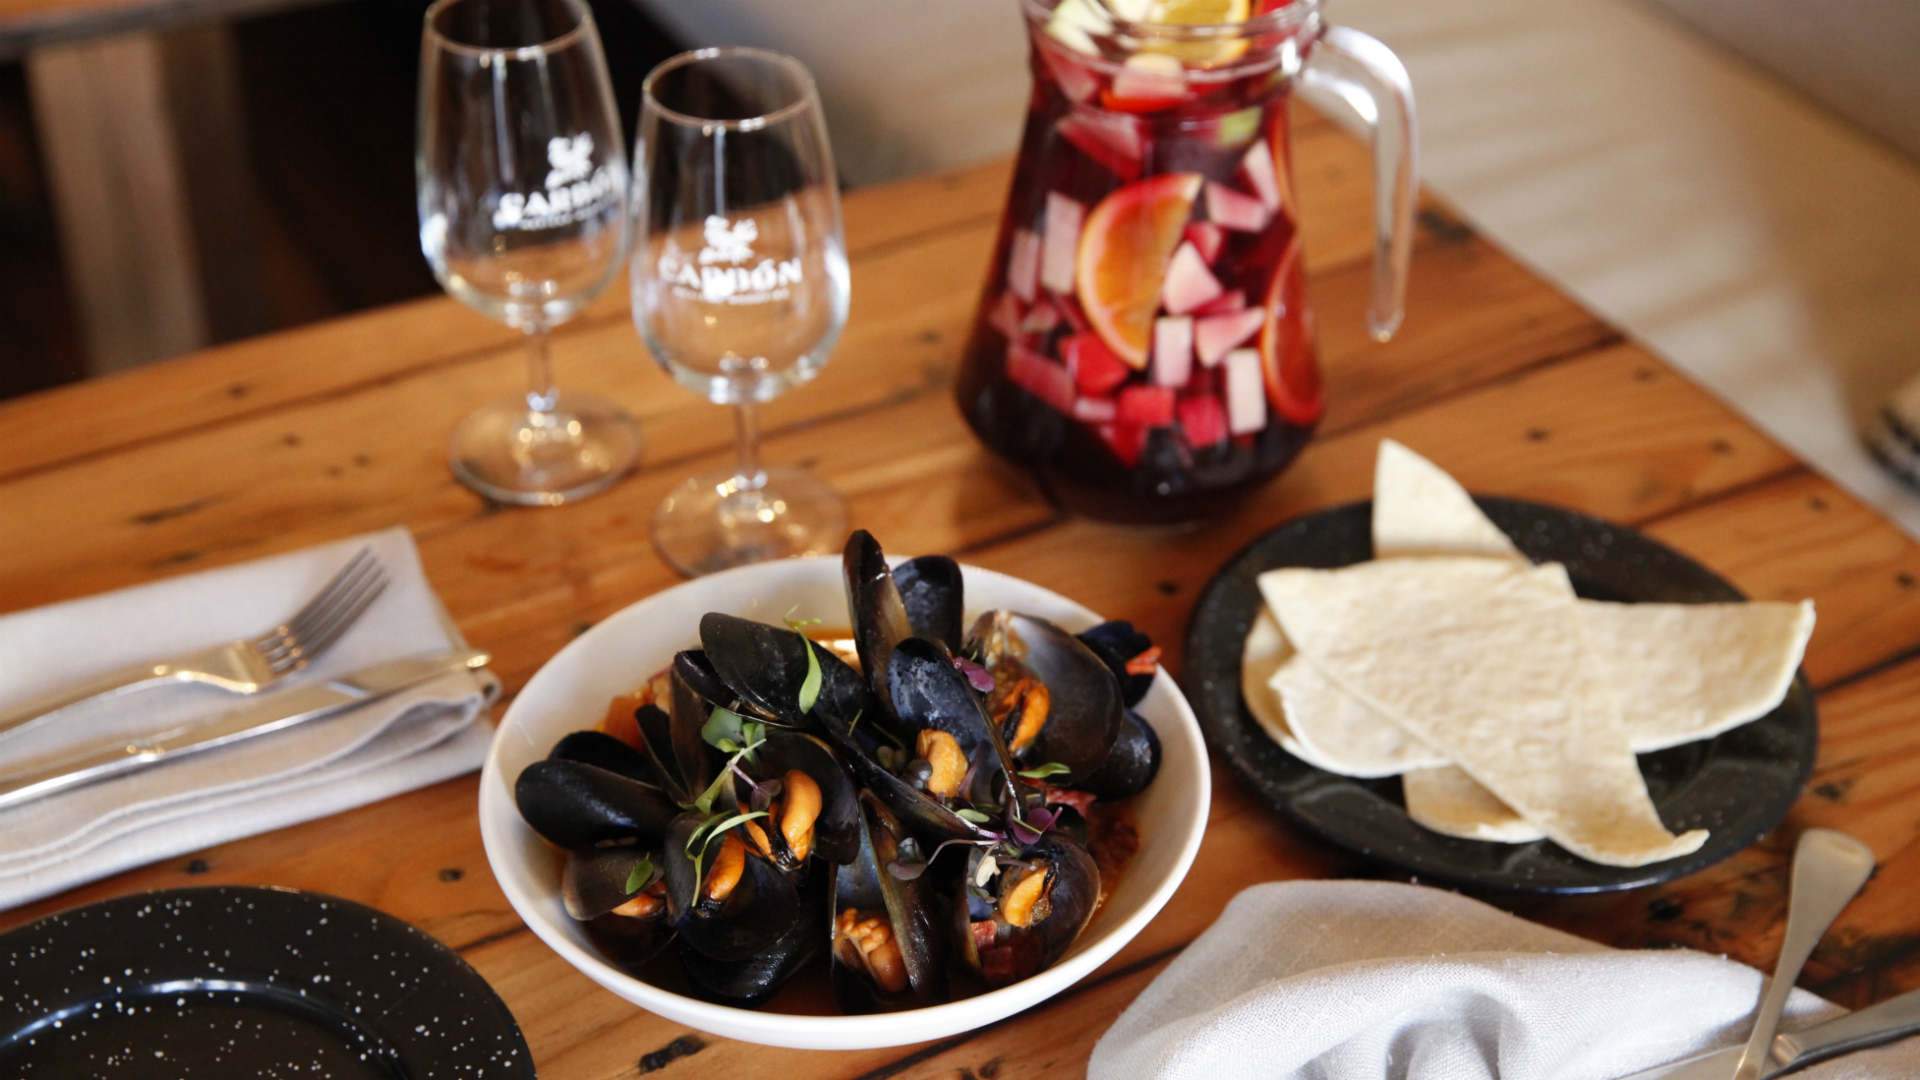 Carbon's Mussels and Sangria Nights